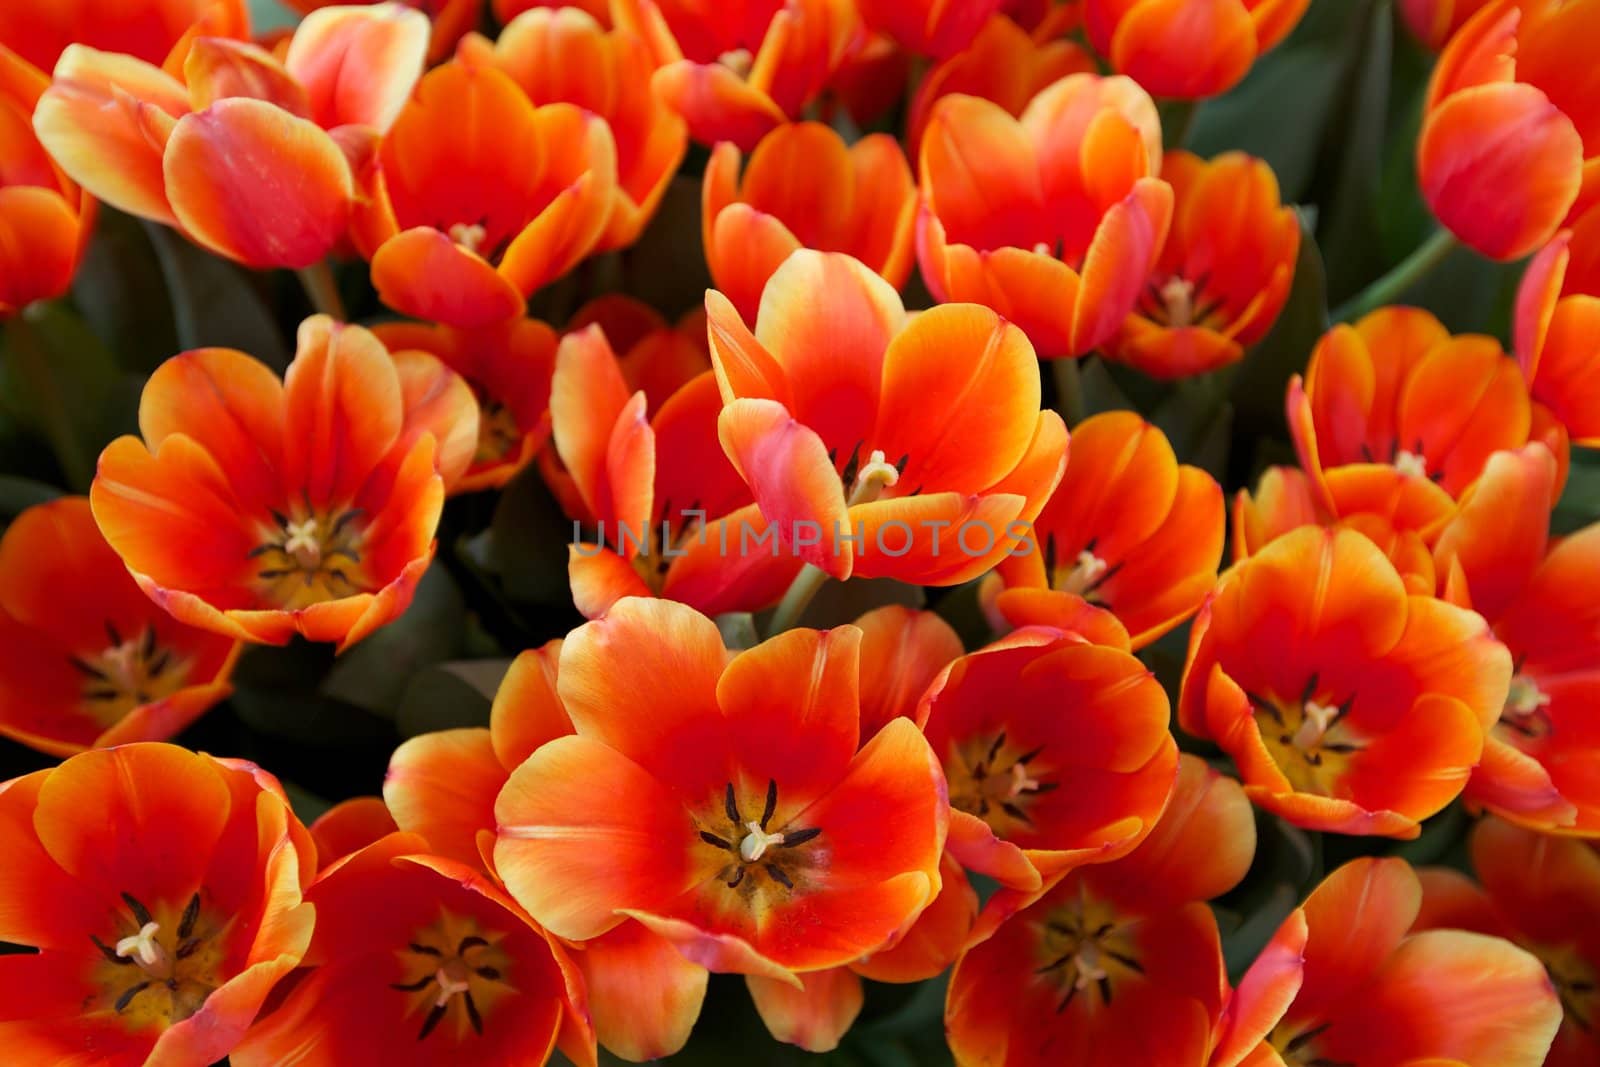 Orange and Yellow Tulips Grown in a Botanical Garden